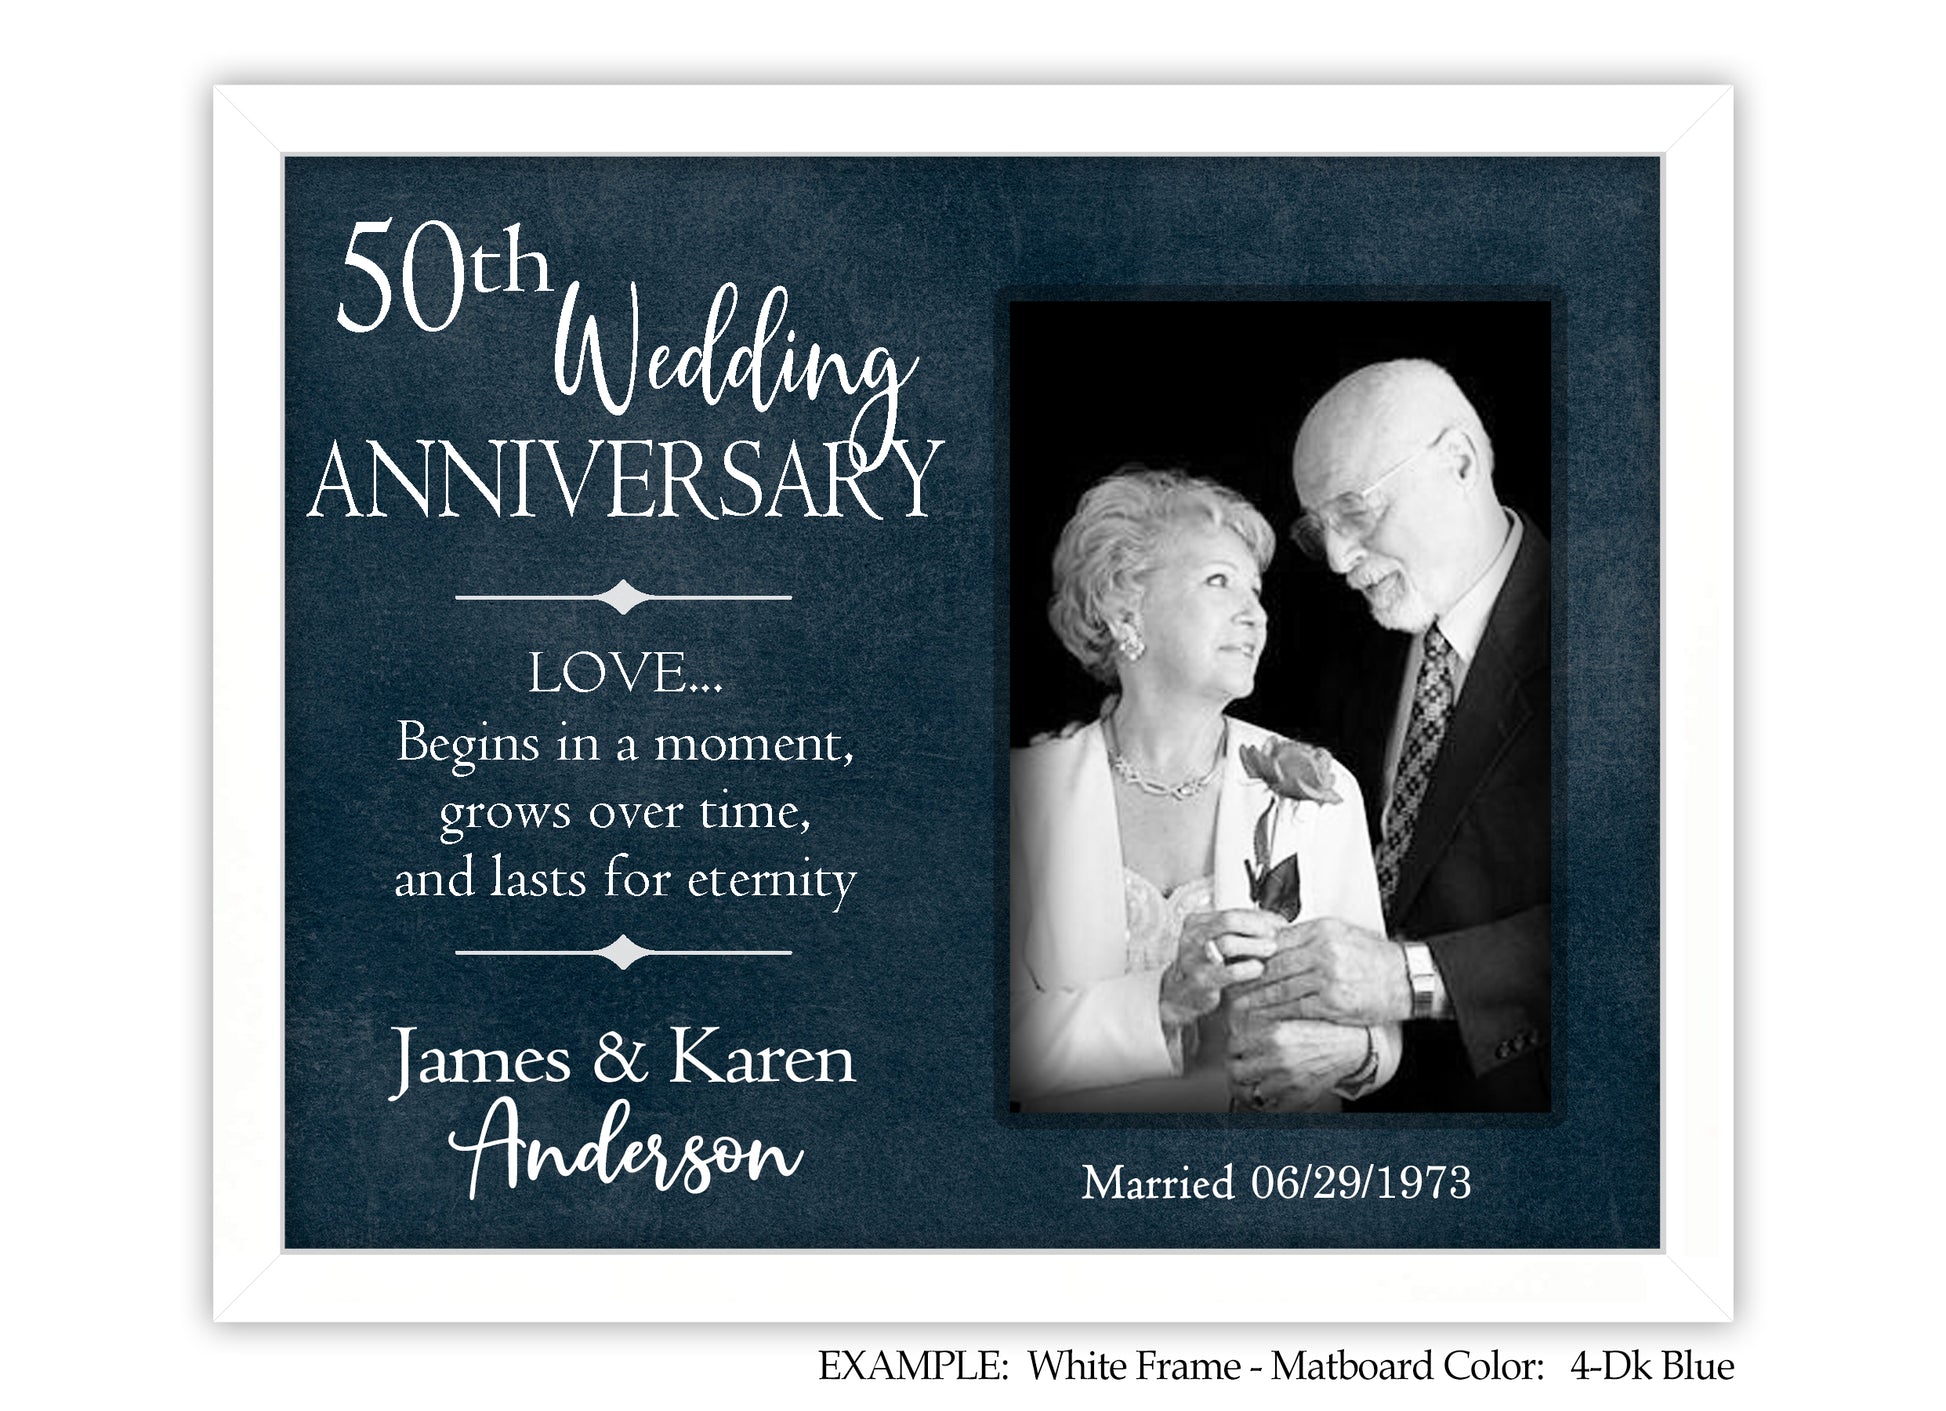 Personalized 50th Wedding Anniversary Frame, 25th, 40th, 8x10 Picture Frame MatboardMemories   